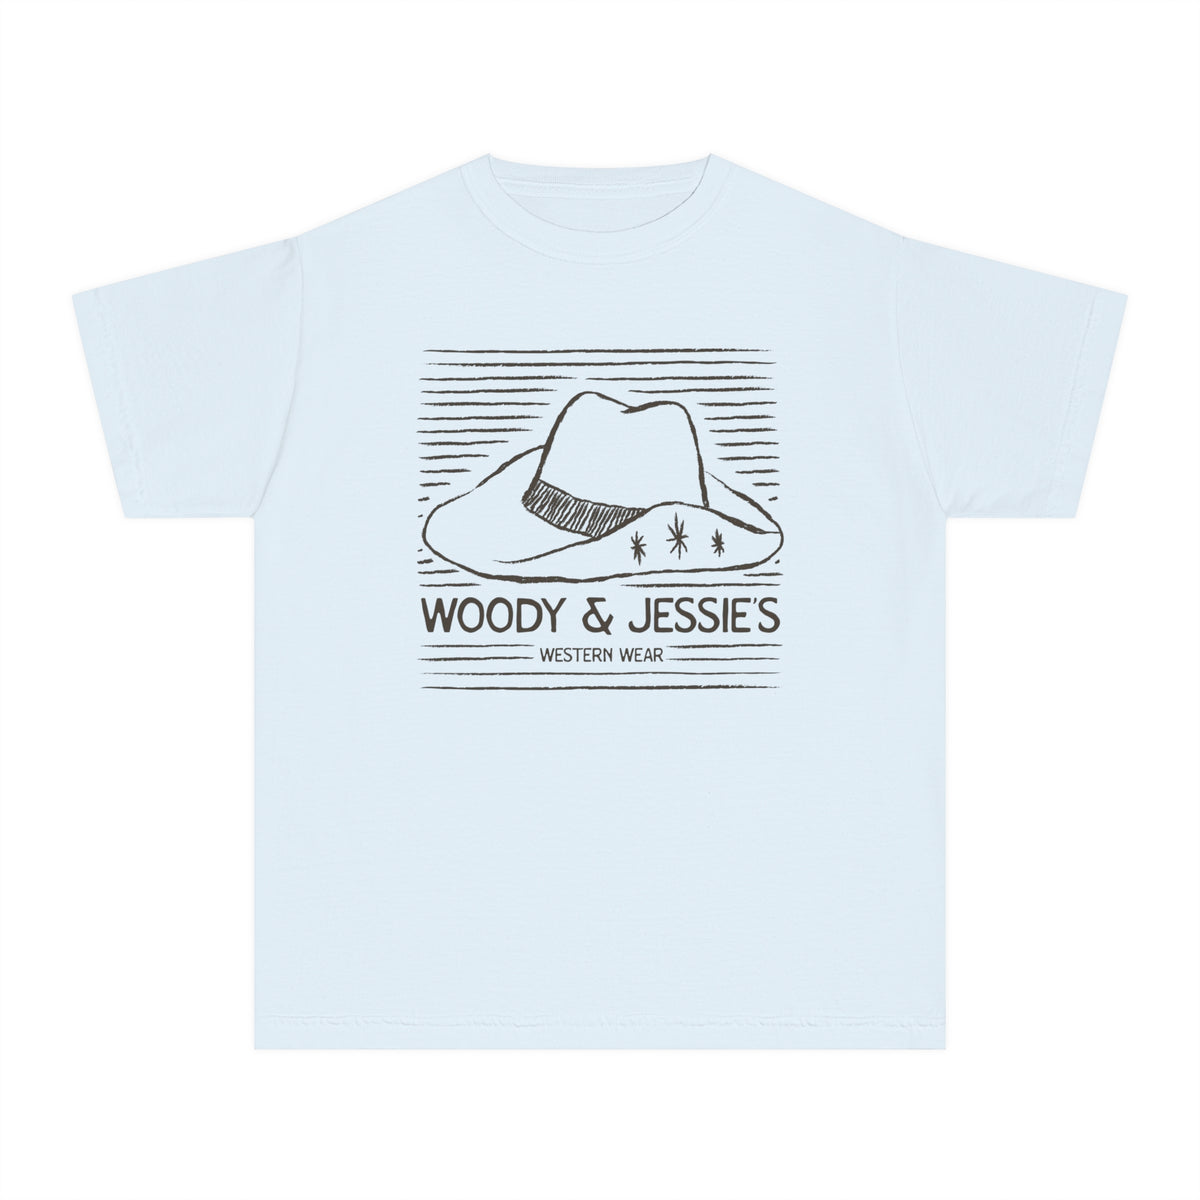 Woody & Jessie's Western Wear Comfort Colors Youth Midweight Tee